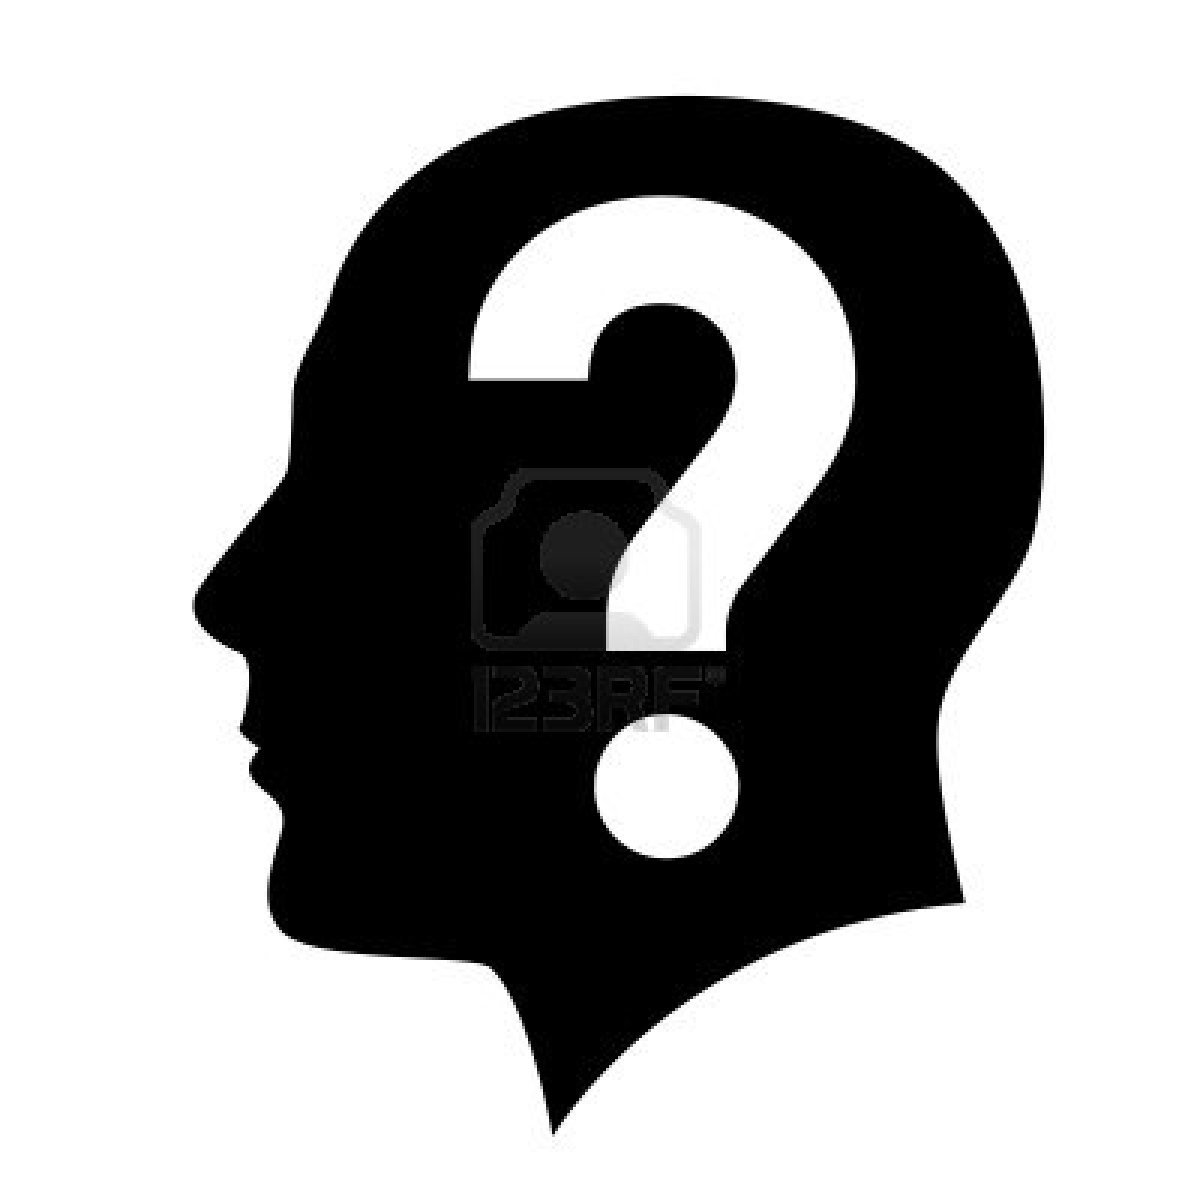 15312895-human-head-with-question-mark-symbol-on-white